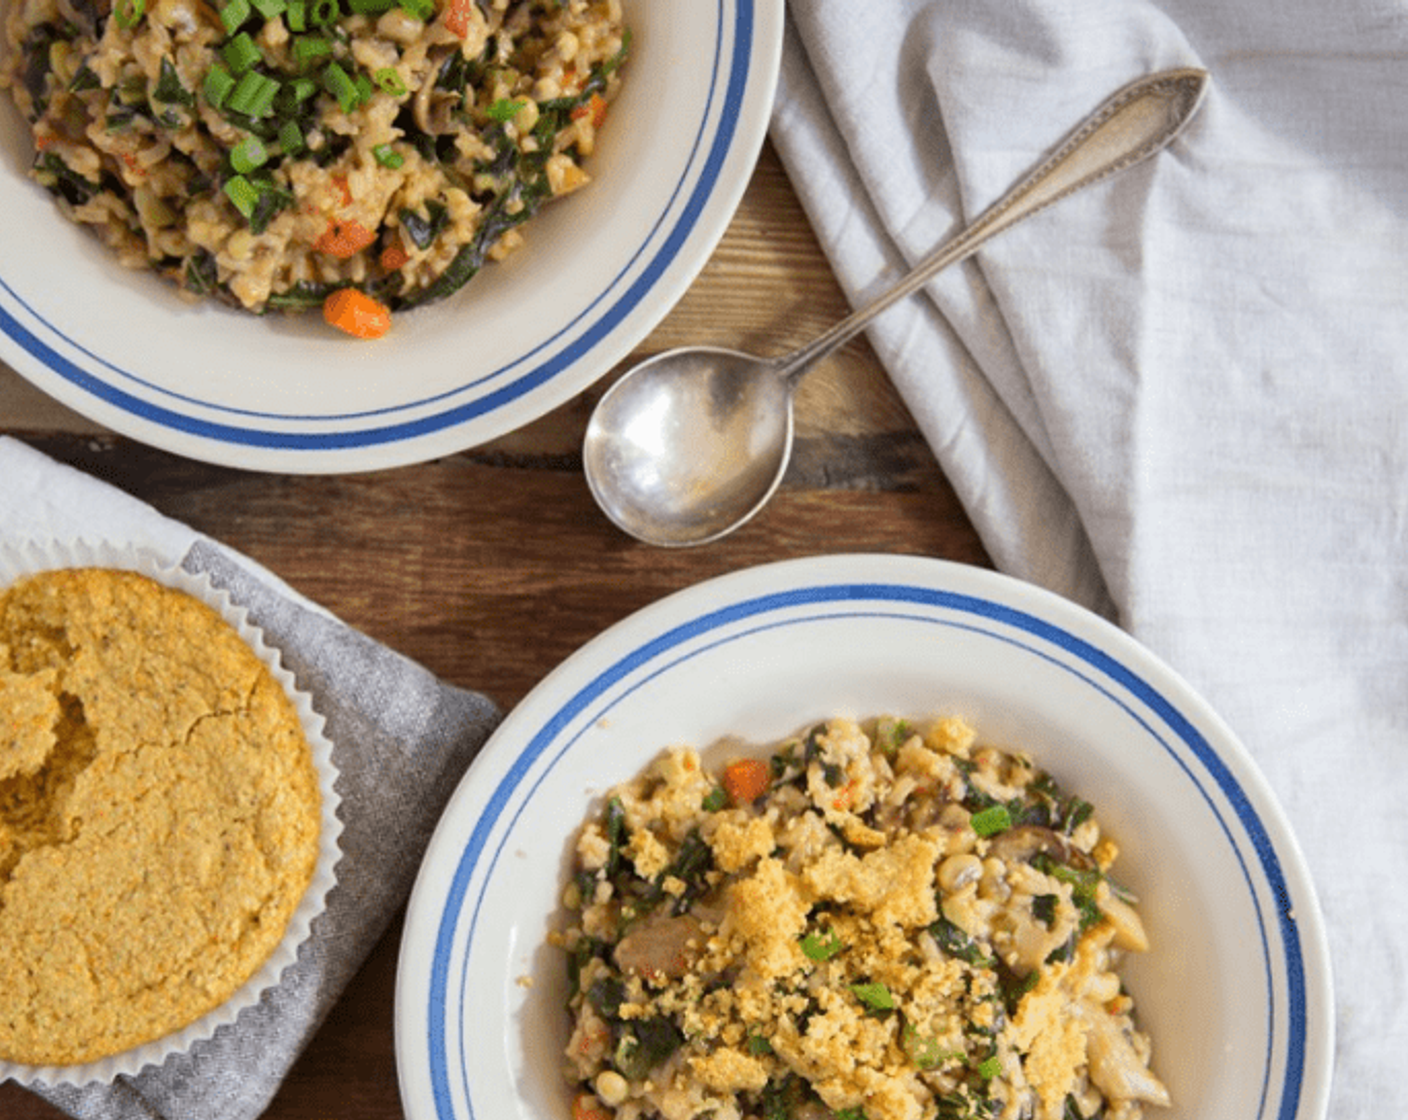 New Year's Hoppin’ John and Greens with Corn Bread